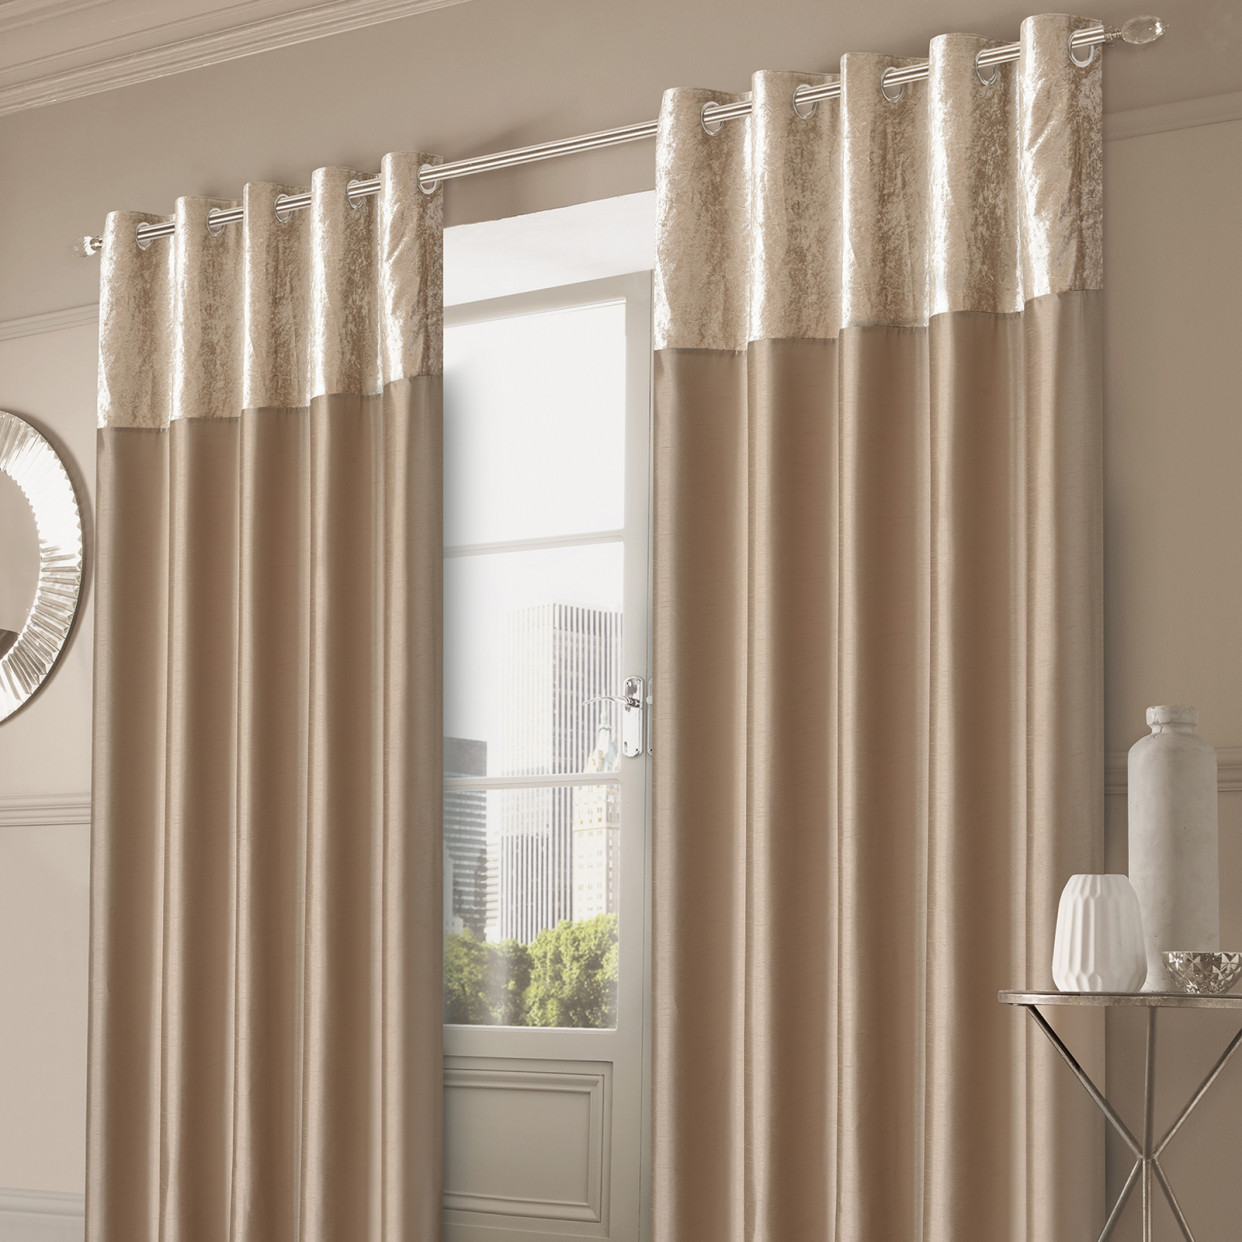 Sienna Home Crushed Velvet Band Eyelet Curtains, Gold - 90"x72">